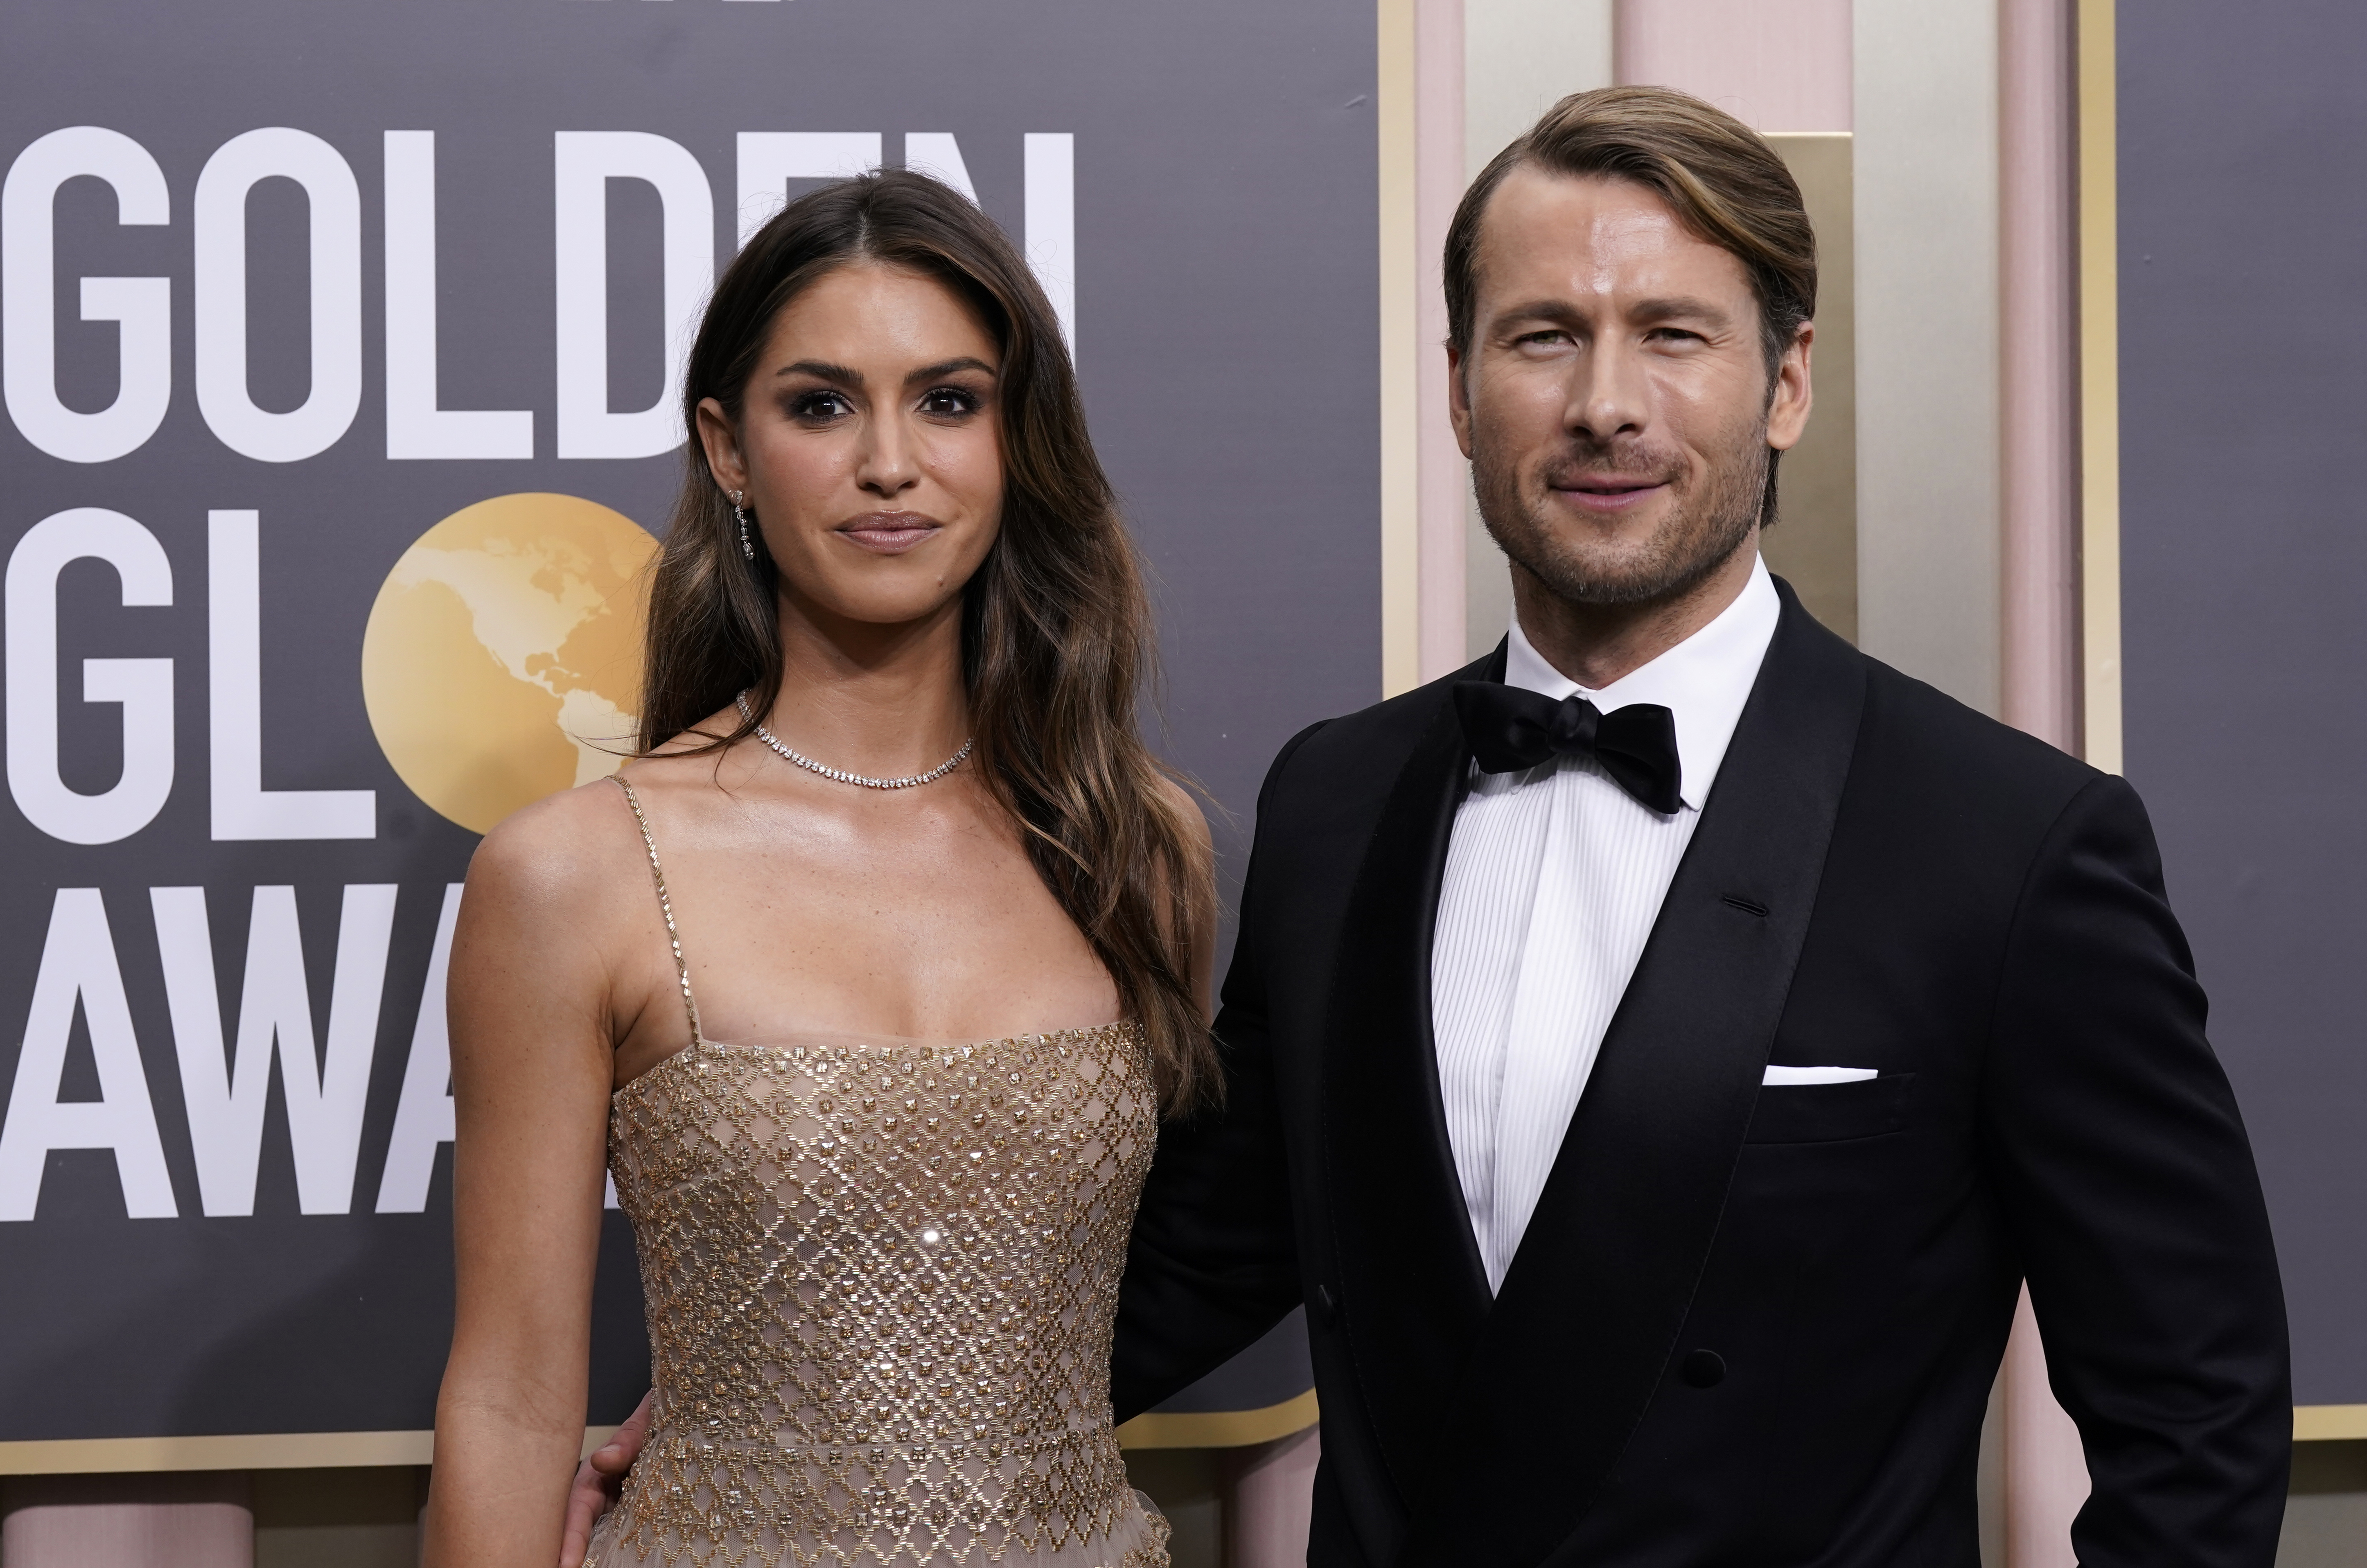 Gigi Paris, left, and Glen Powell arrive at the 80th annual Golden Globe Awards at the Beverly Hilton Hotel on Tuesday, Jan. 10, 2023, in Beverly Hills, Calif. (Photo by Jordan Strauss/Invision/AP)